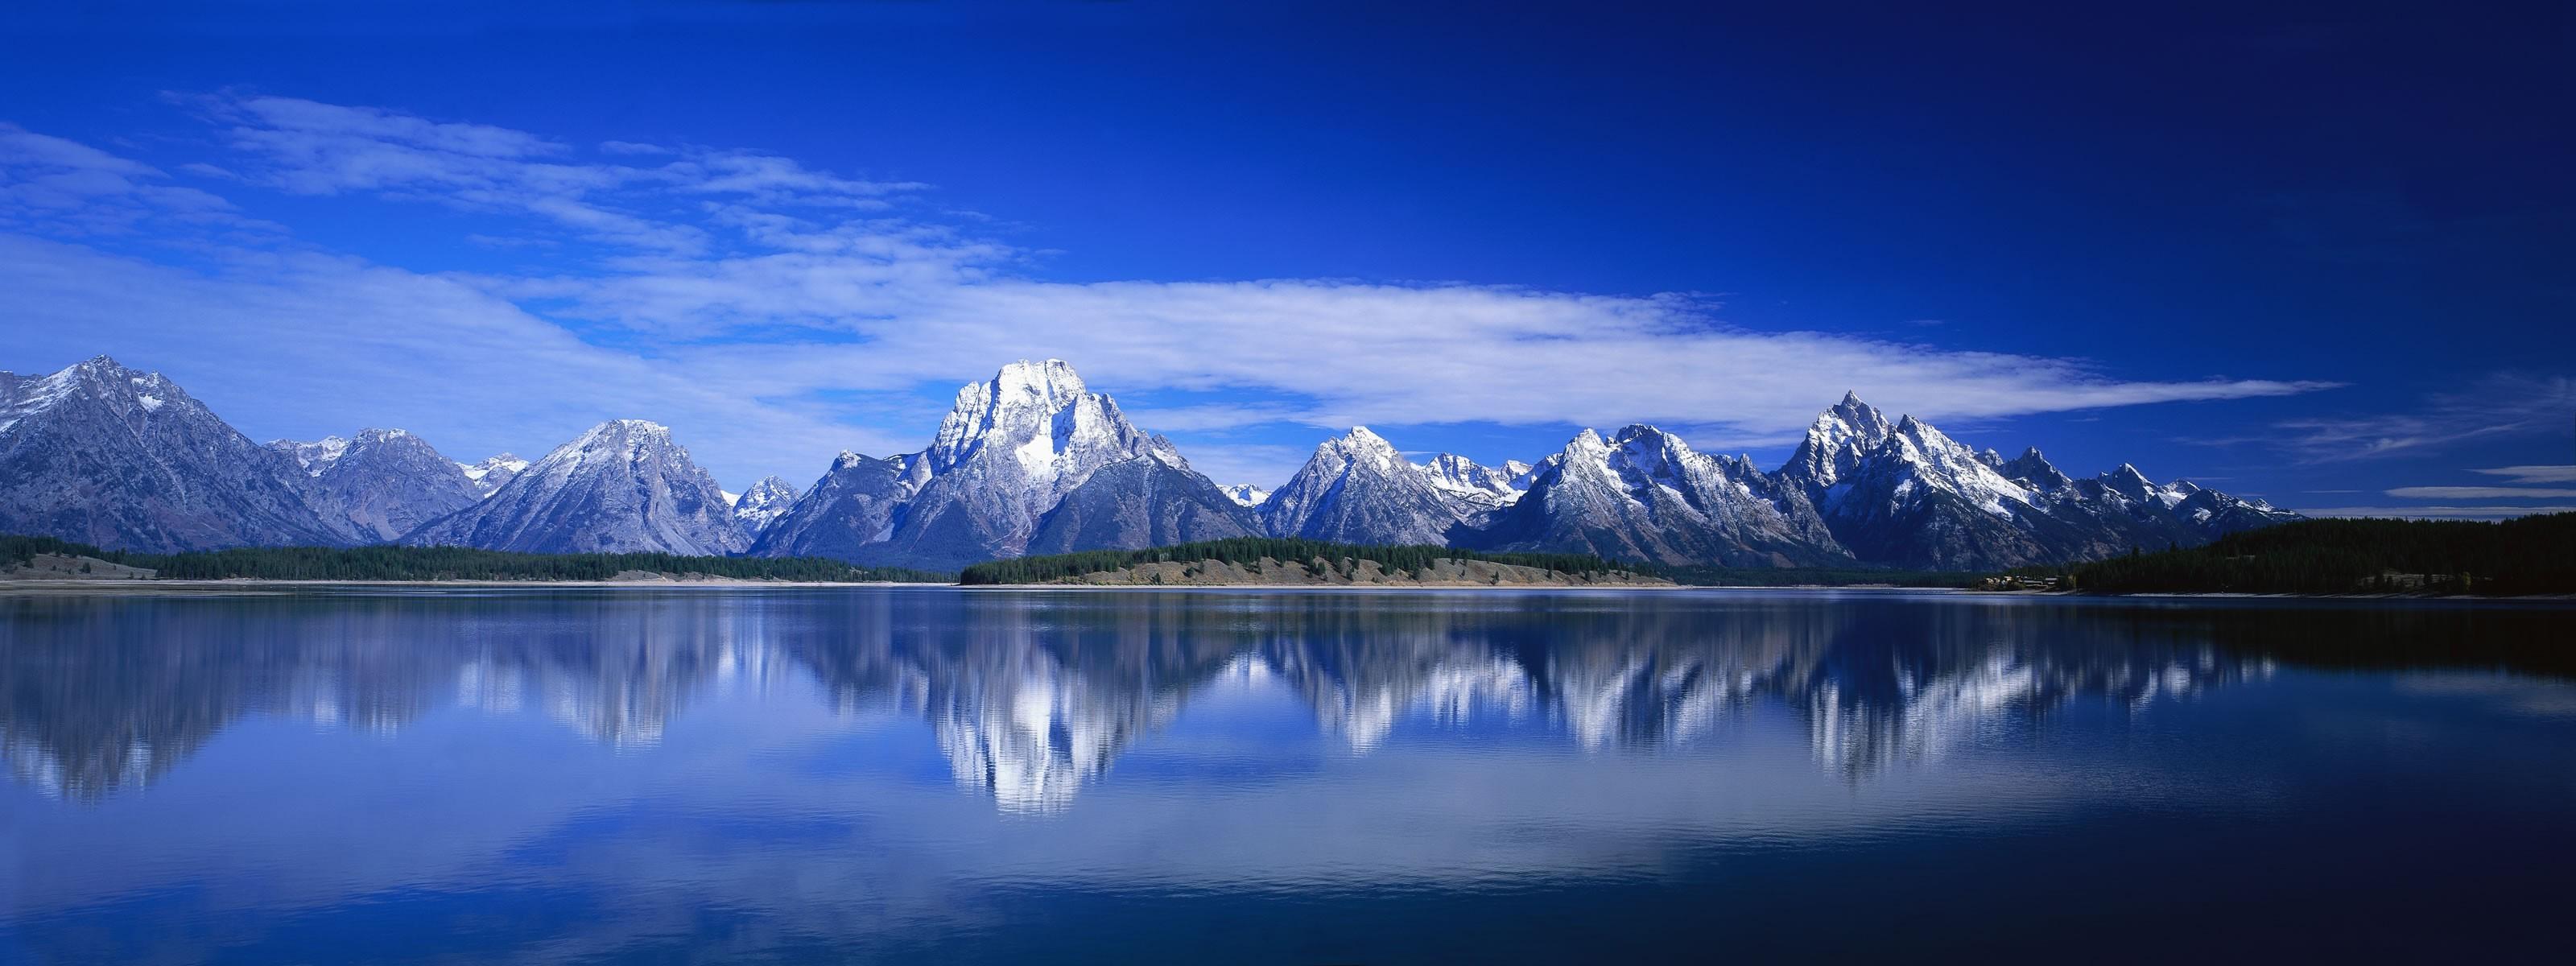 reflection nature sky mountains wallpaper and background